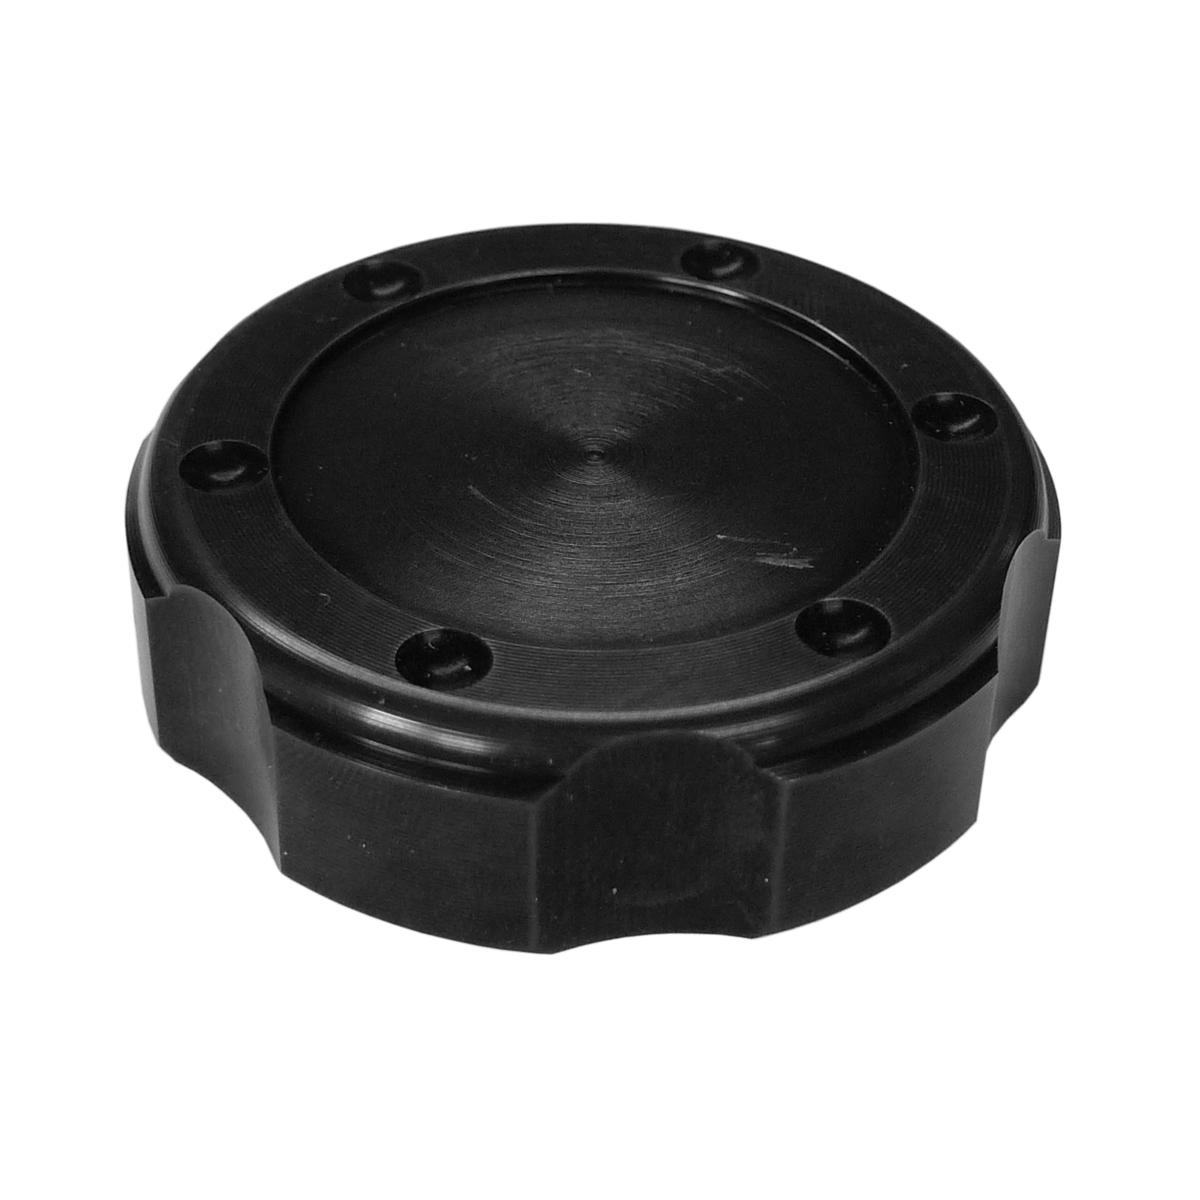 Black Anodised 45mm (1.75 Inch) Alloy Screw Cap Only